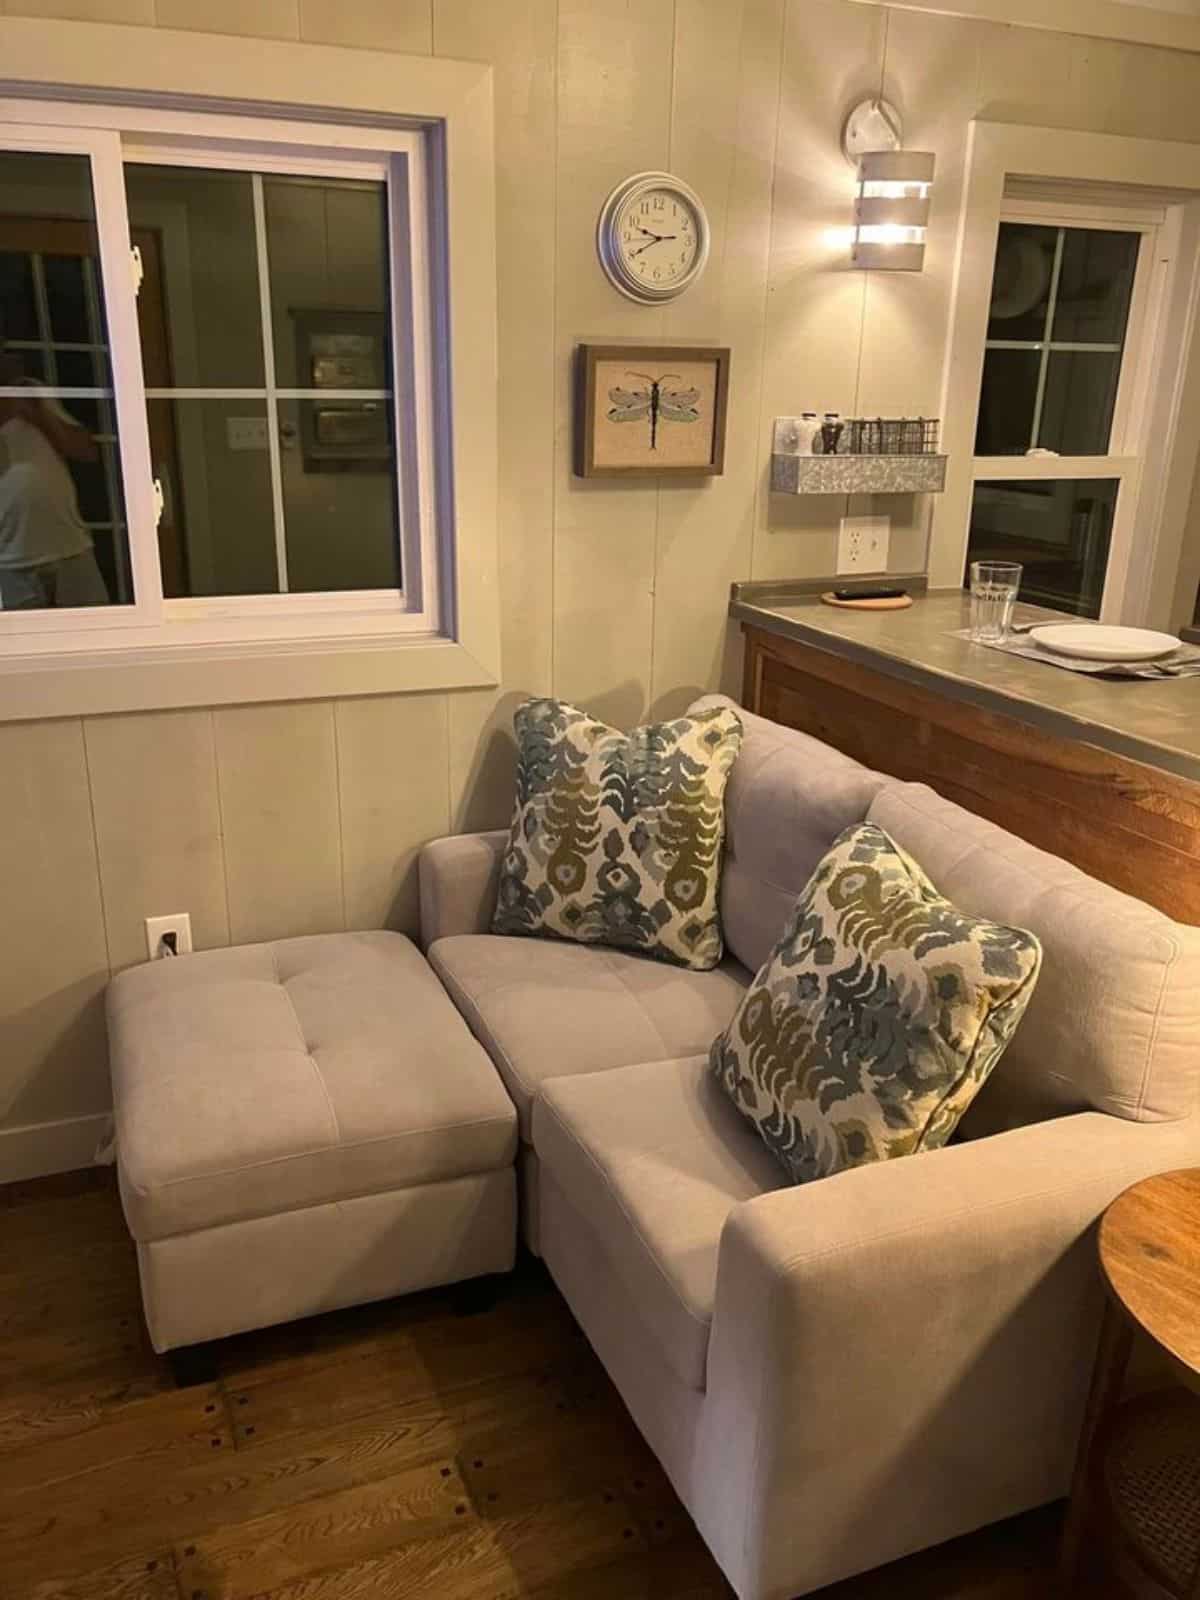 L shaped couch in the living area